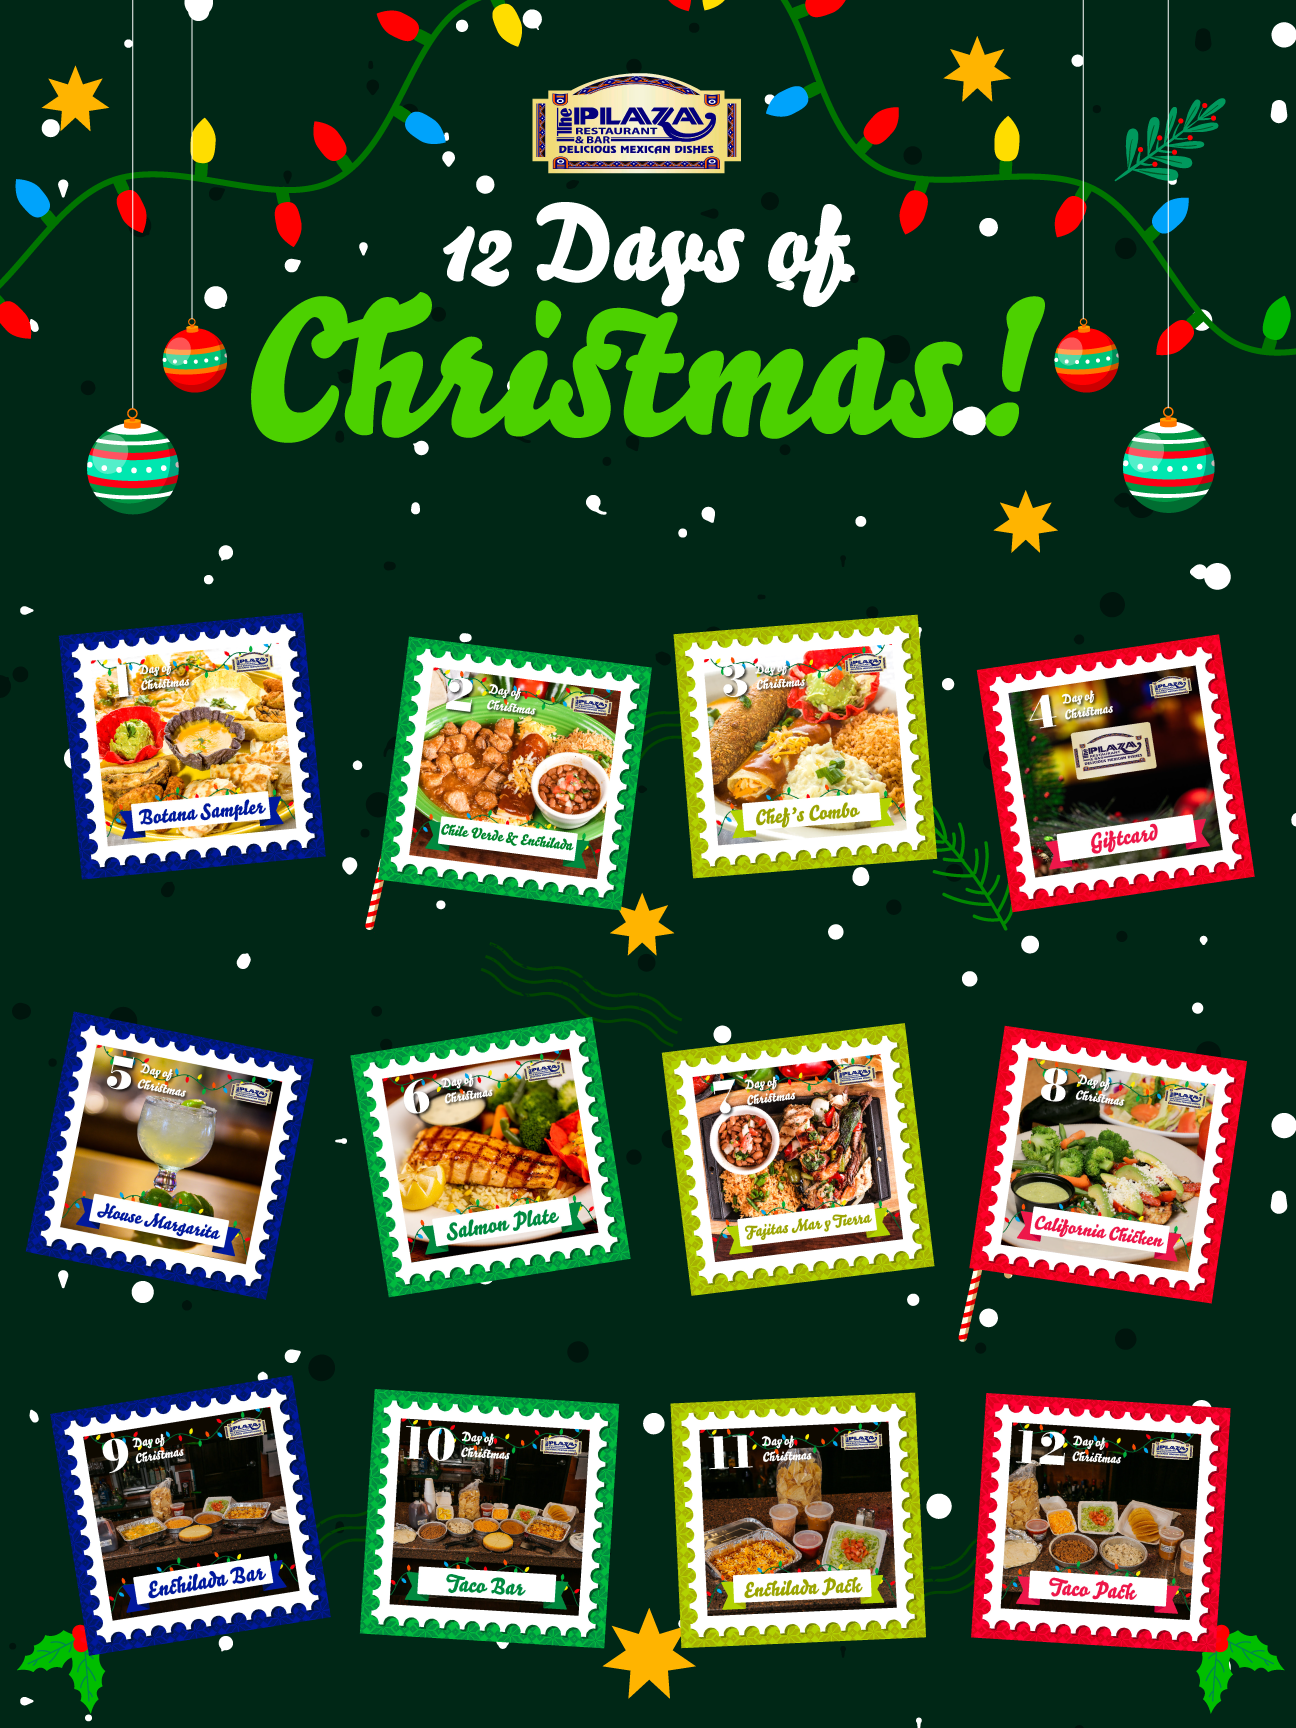 12 days of Christmas at the plaza restaurant